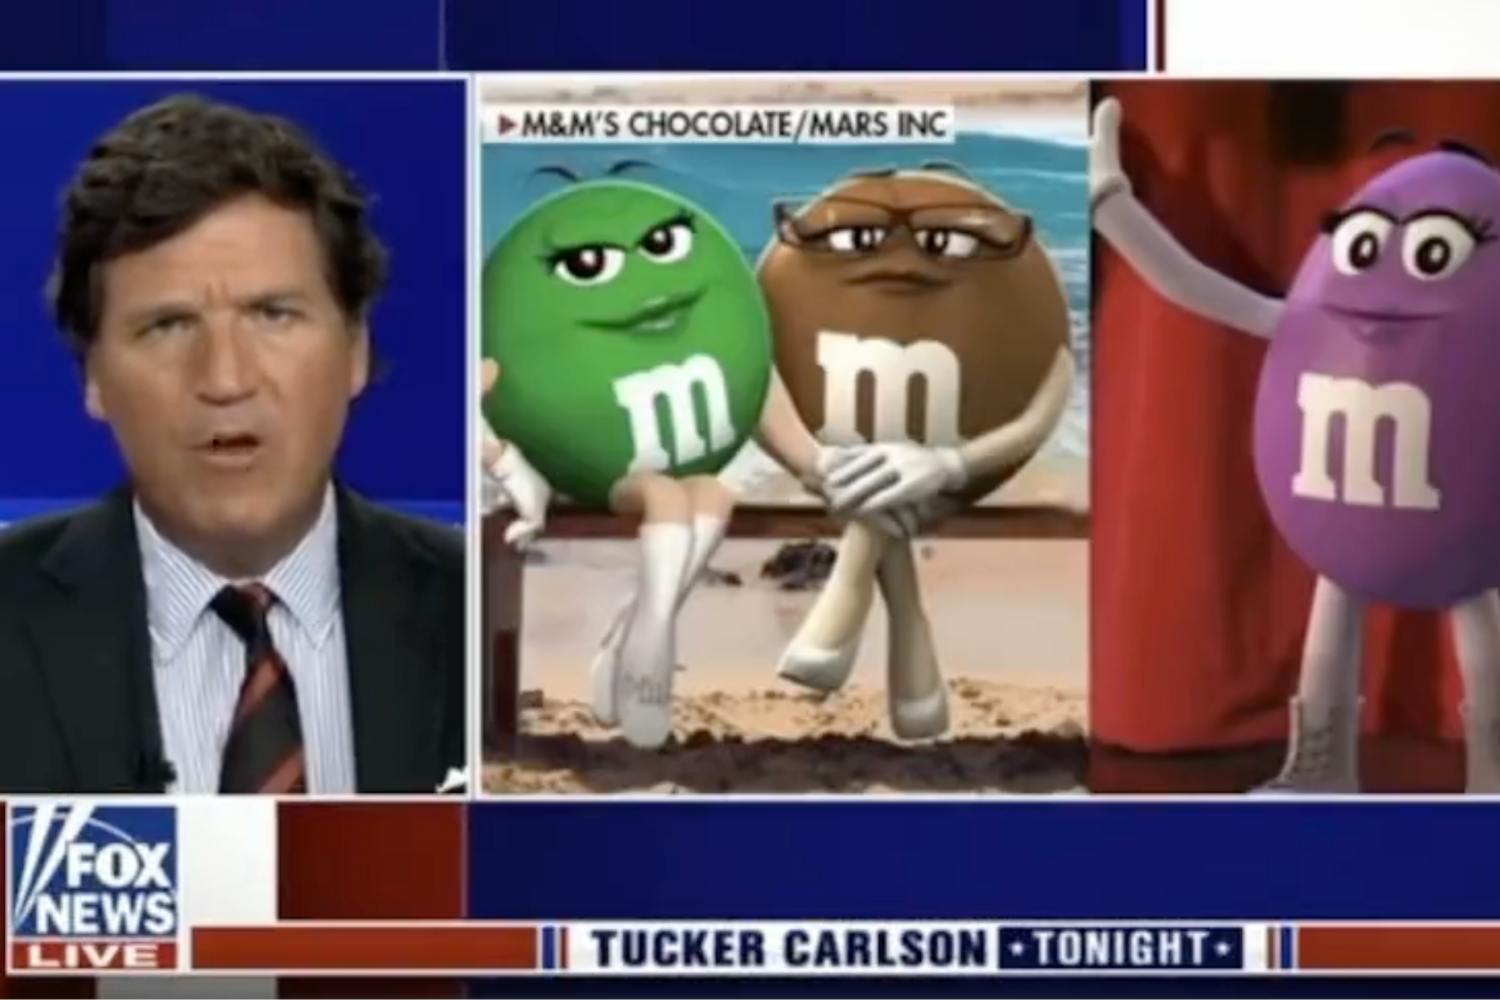 Why M&M's Dropped Their 'Woke' Mascots